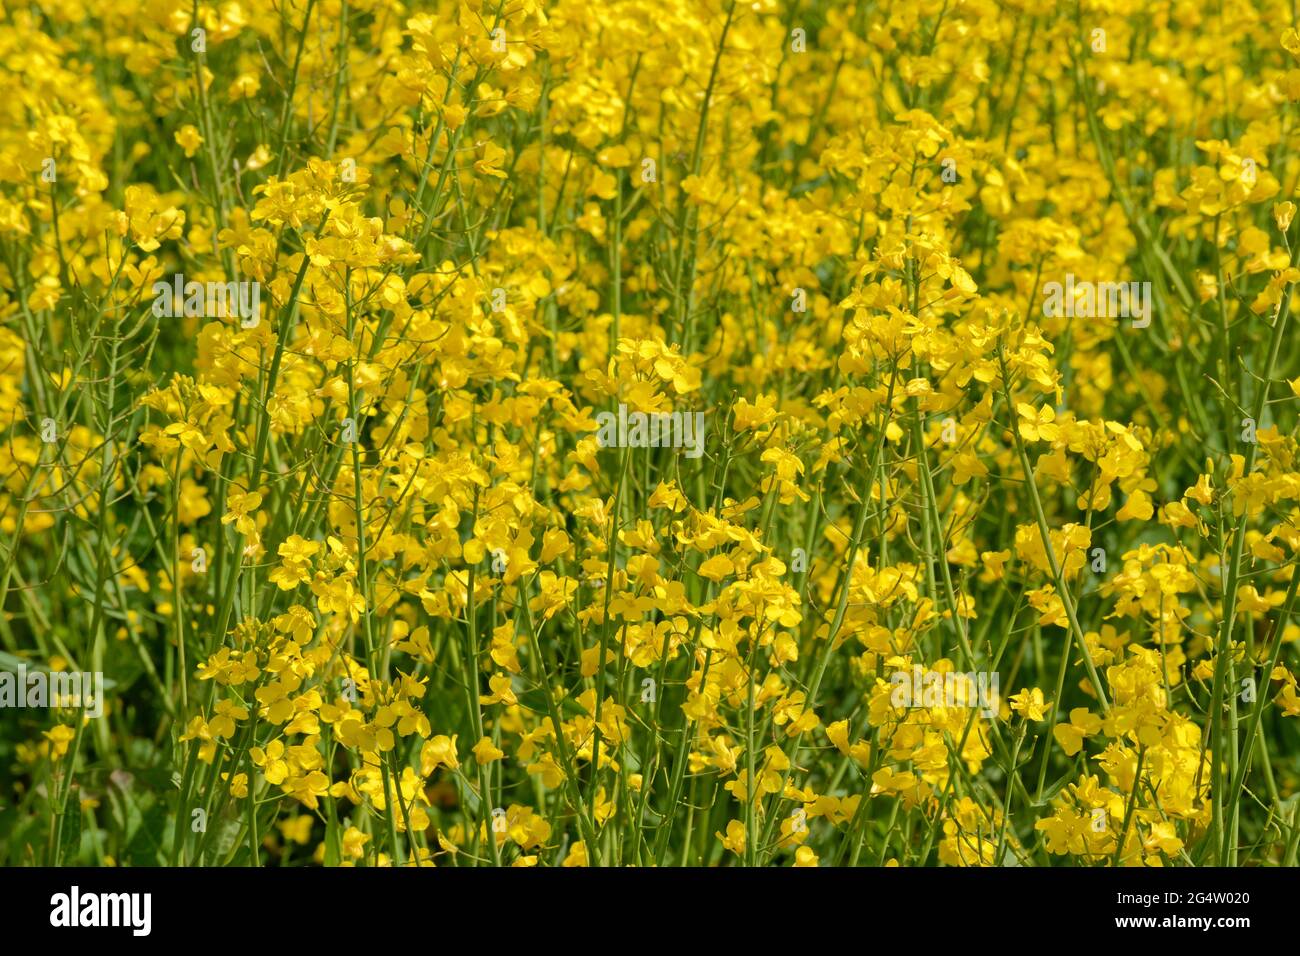 Farmed Rapeseed flowers prior to harvest. Stock Photo